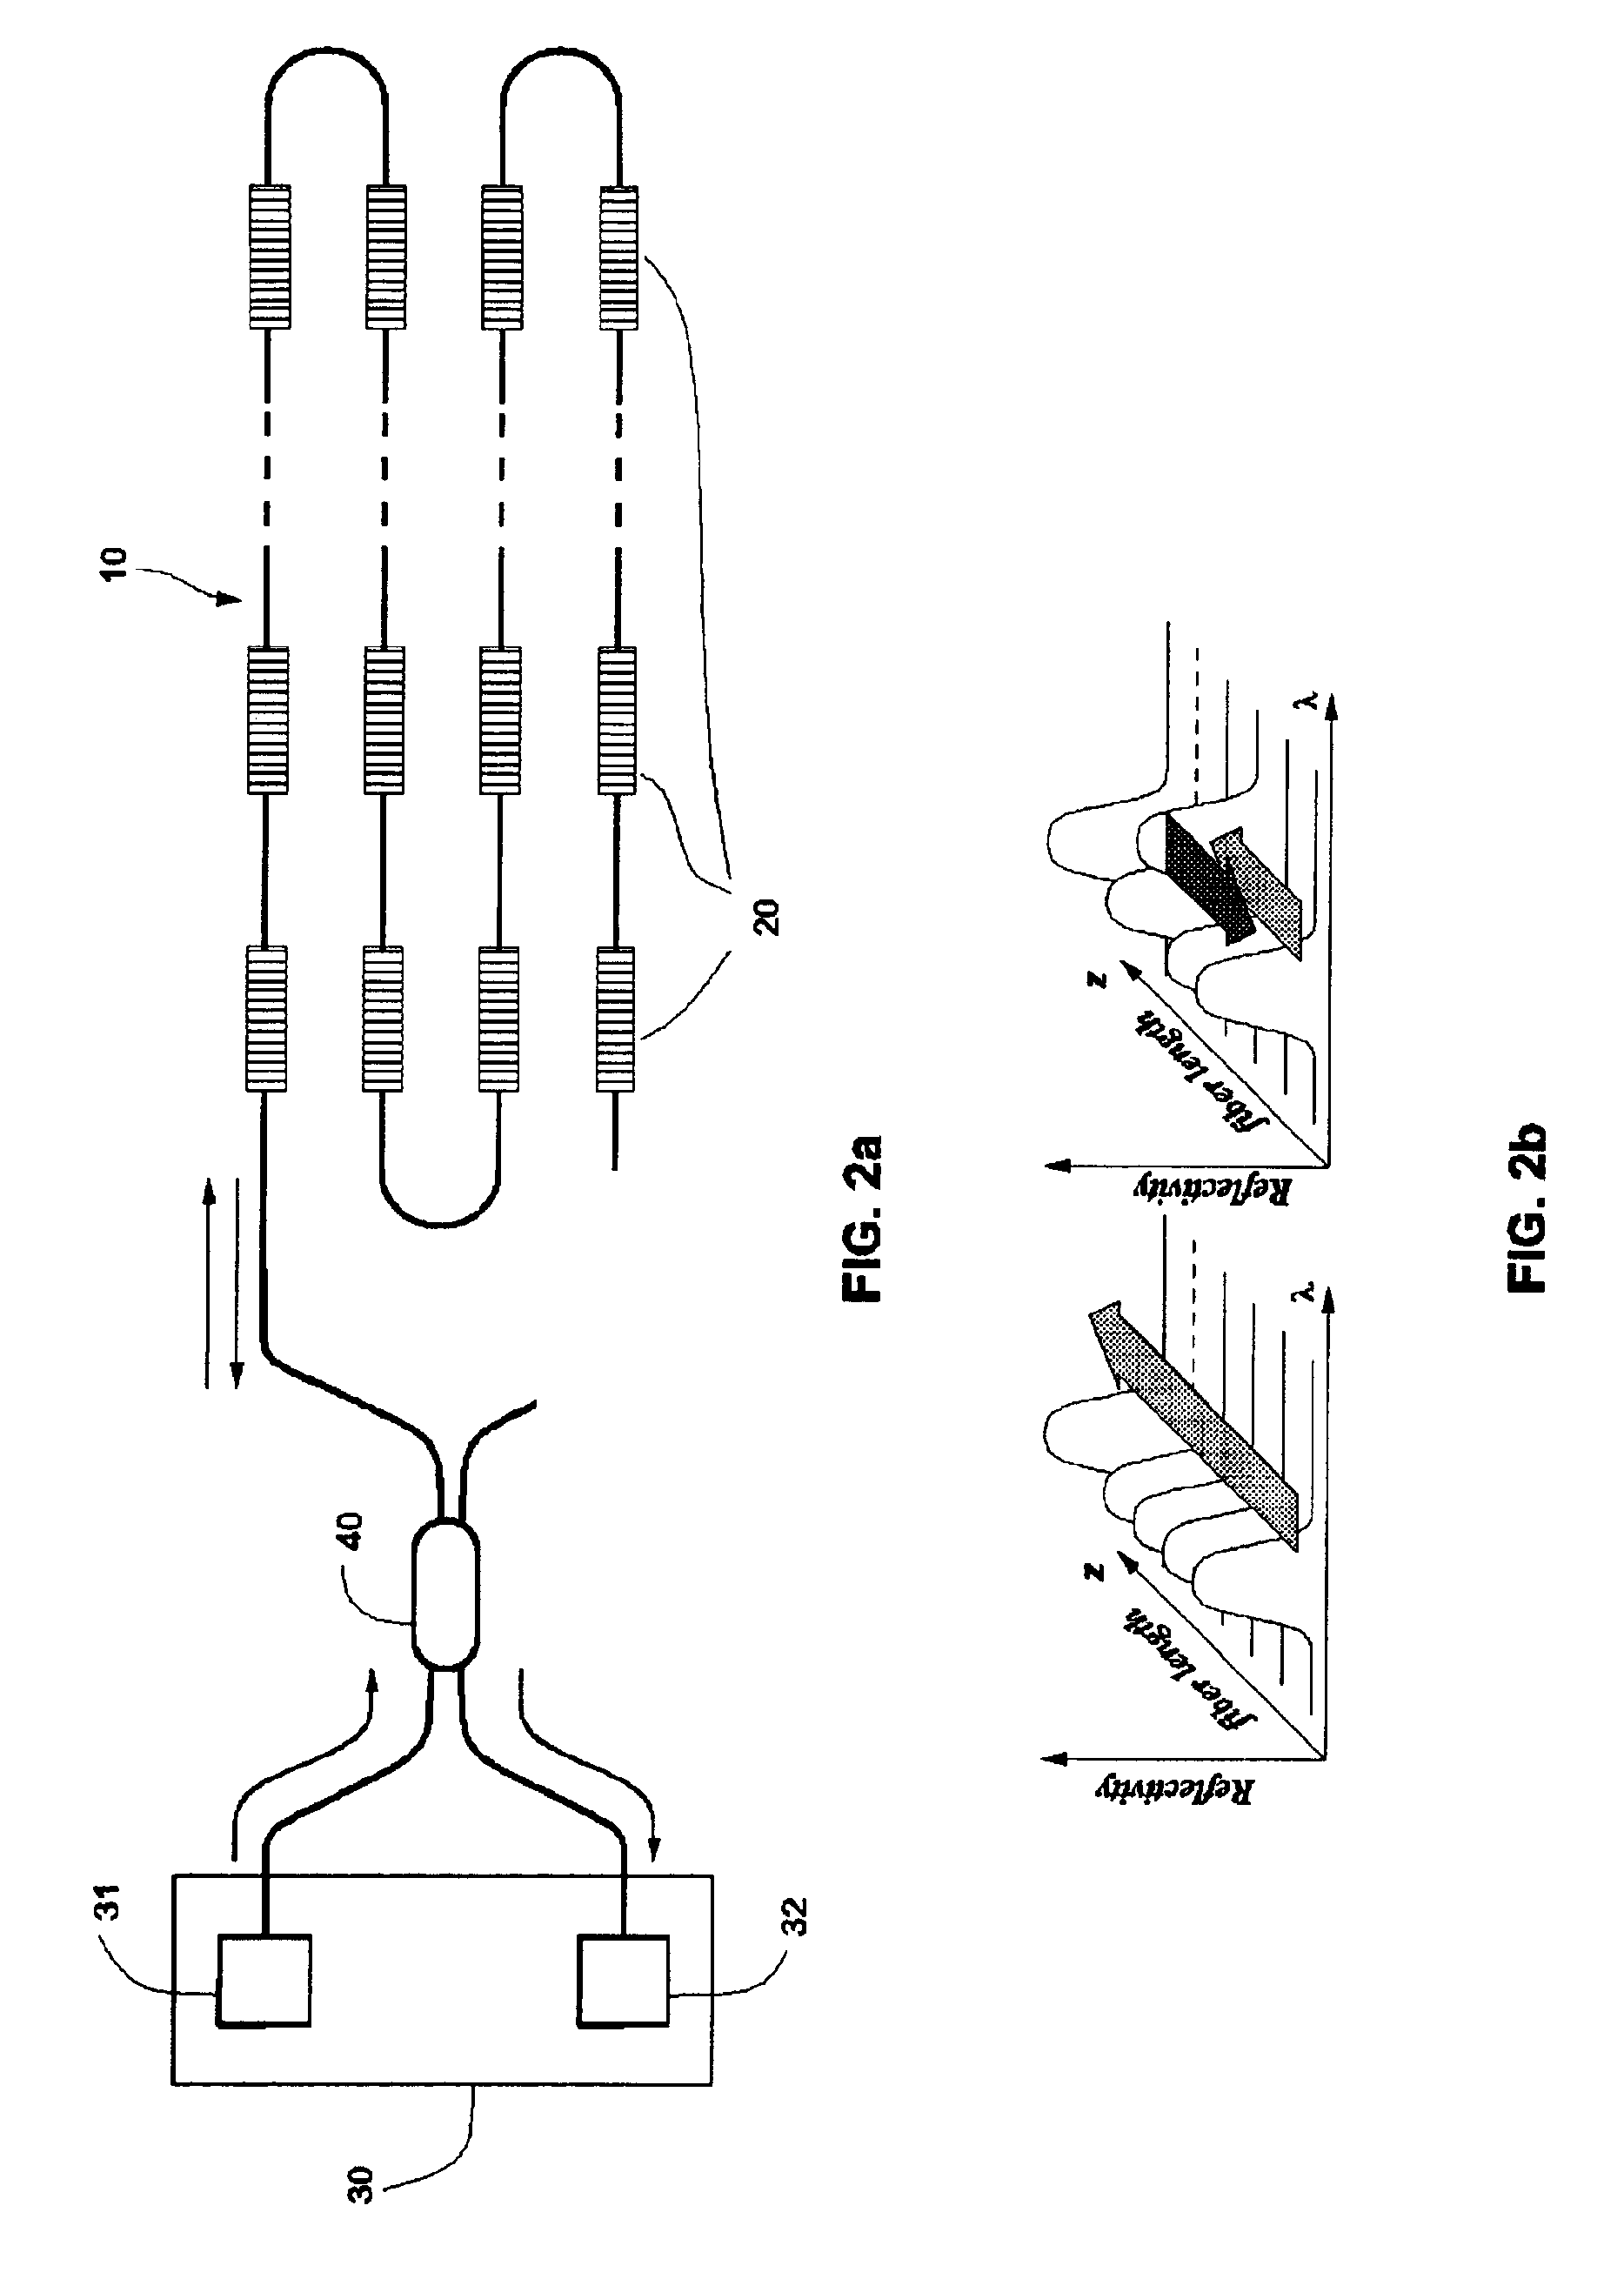 Fiber-optic sensing system for distributed detection and localization of alarm conditions